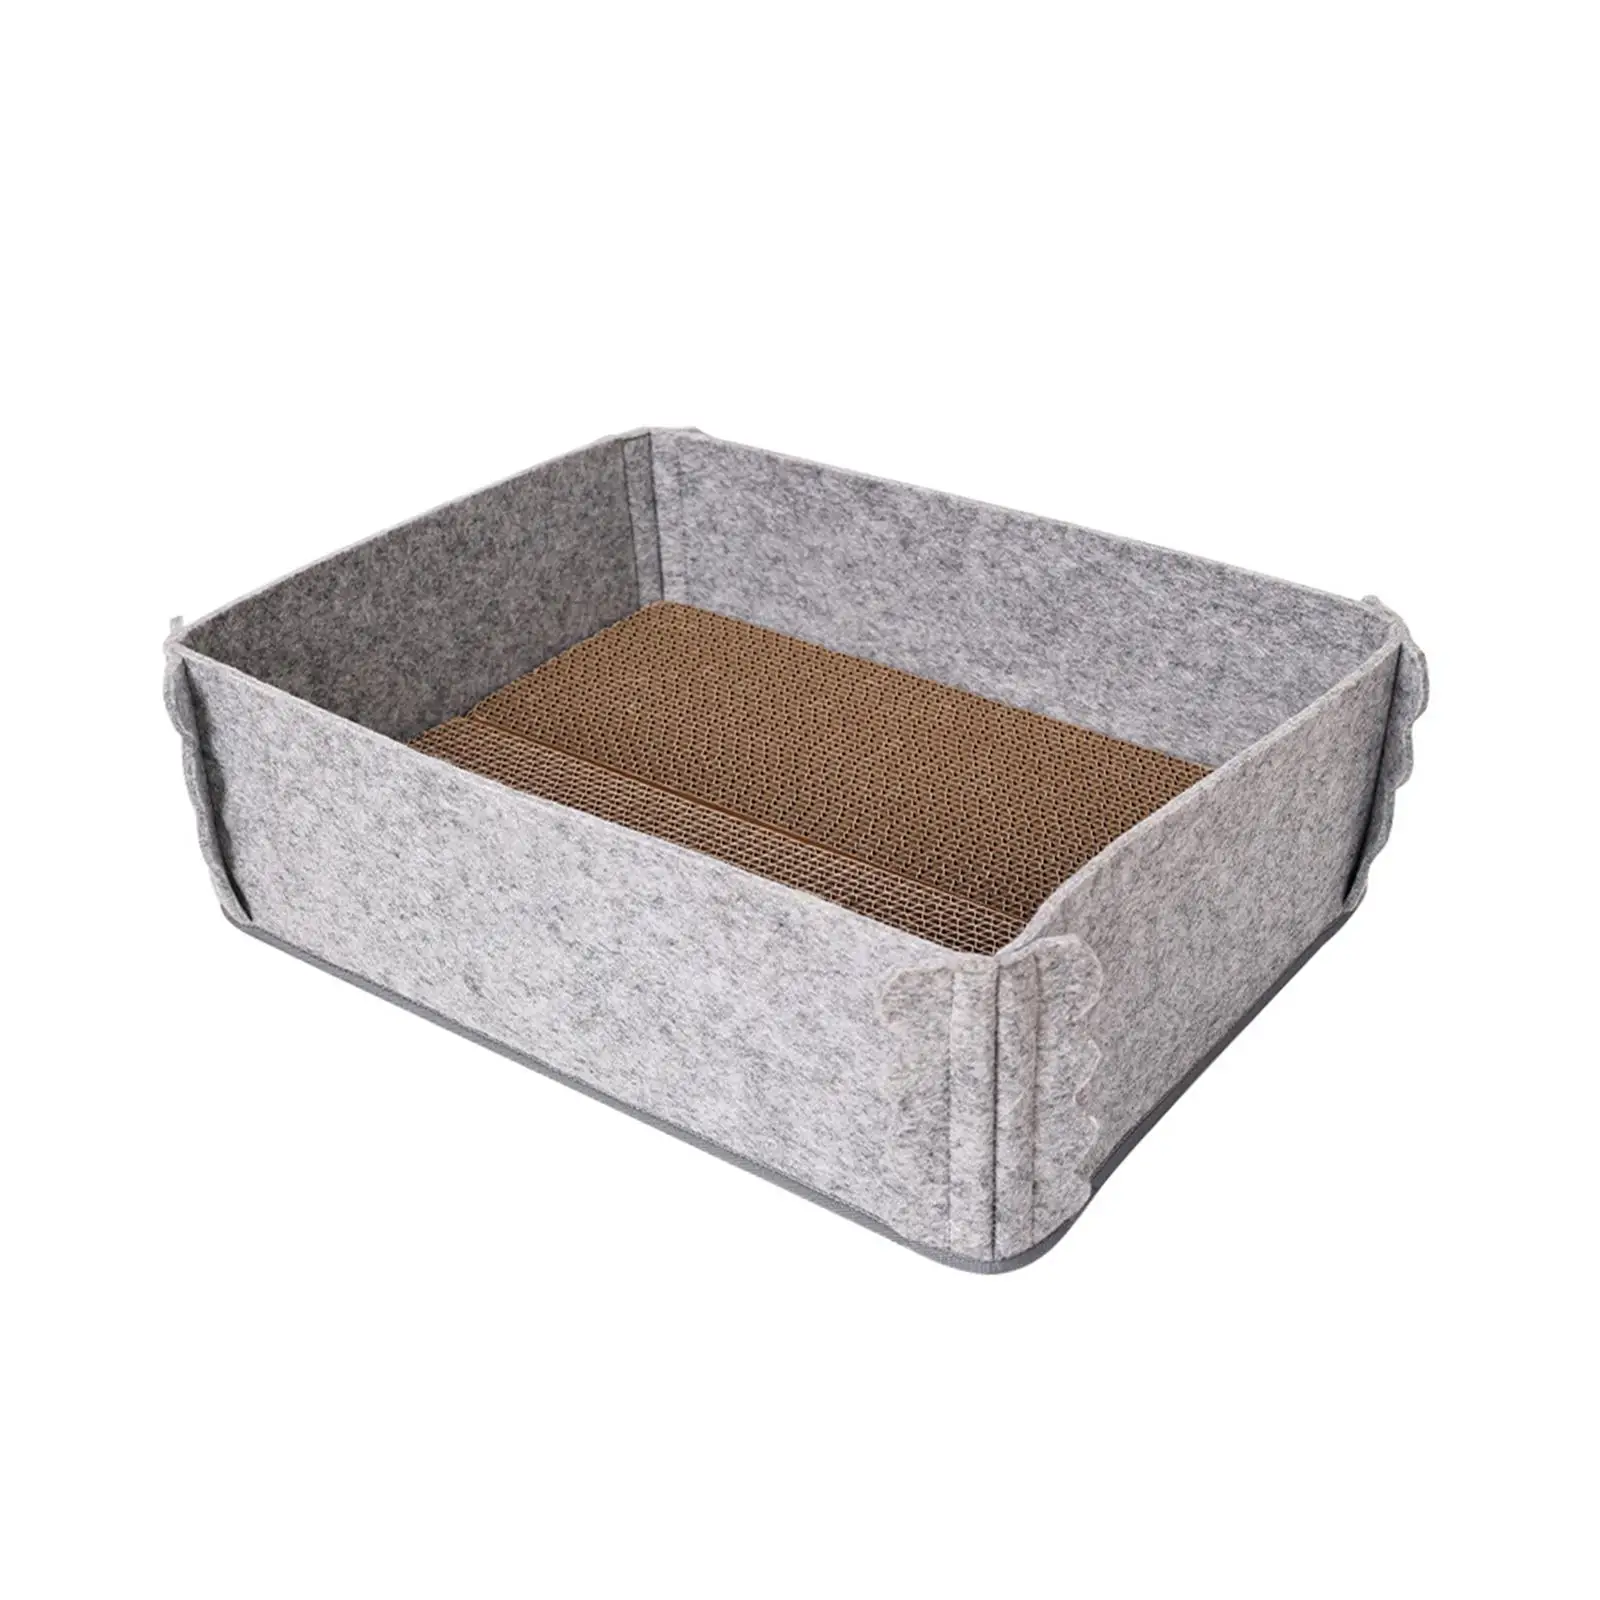 Recyclable Cat Scratcher Cardboard Corrugated Paper Couch Replace Board Pet Supplies Kitten Protect Carpets Teaser Scratch Nest